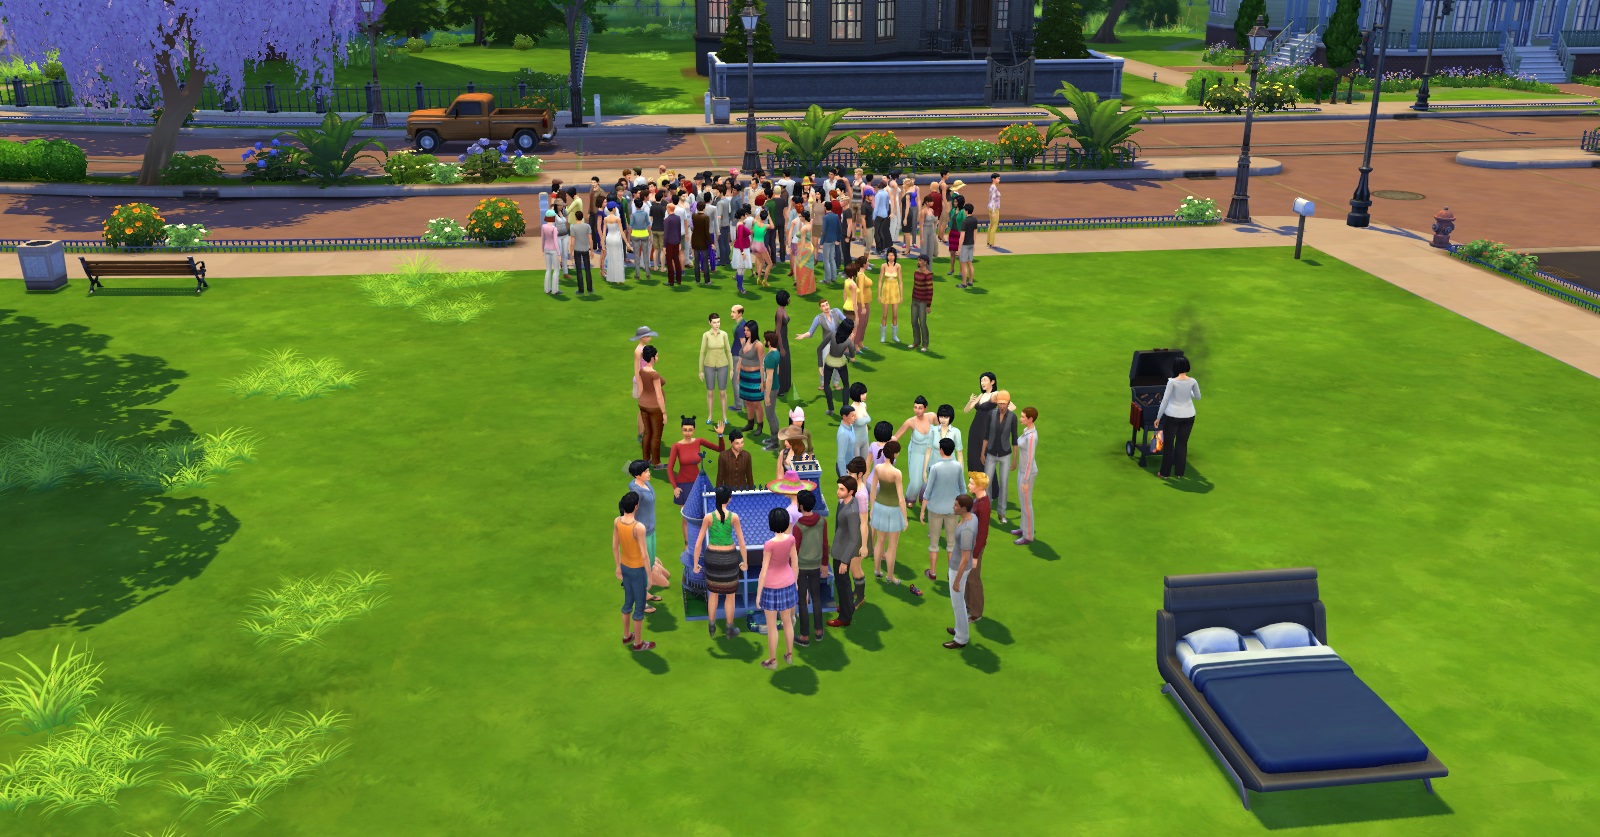 sims 4 free online download